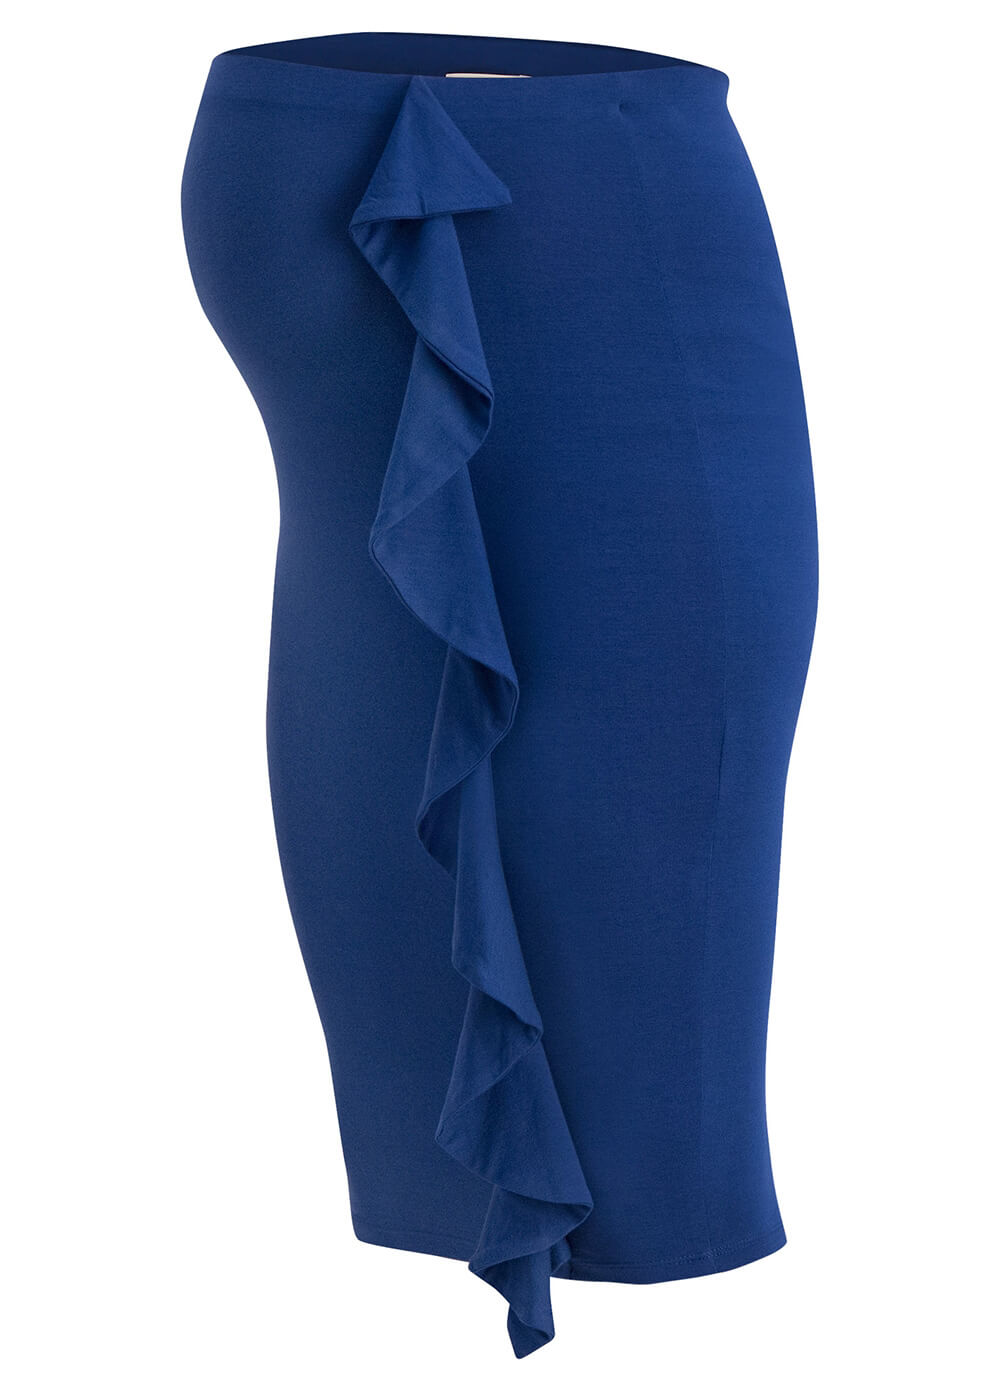 Deri Ruffle Maternity Skirt in Blue by Noppies